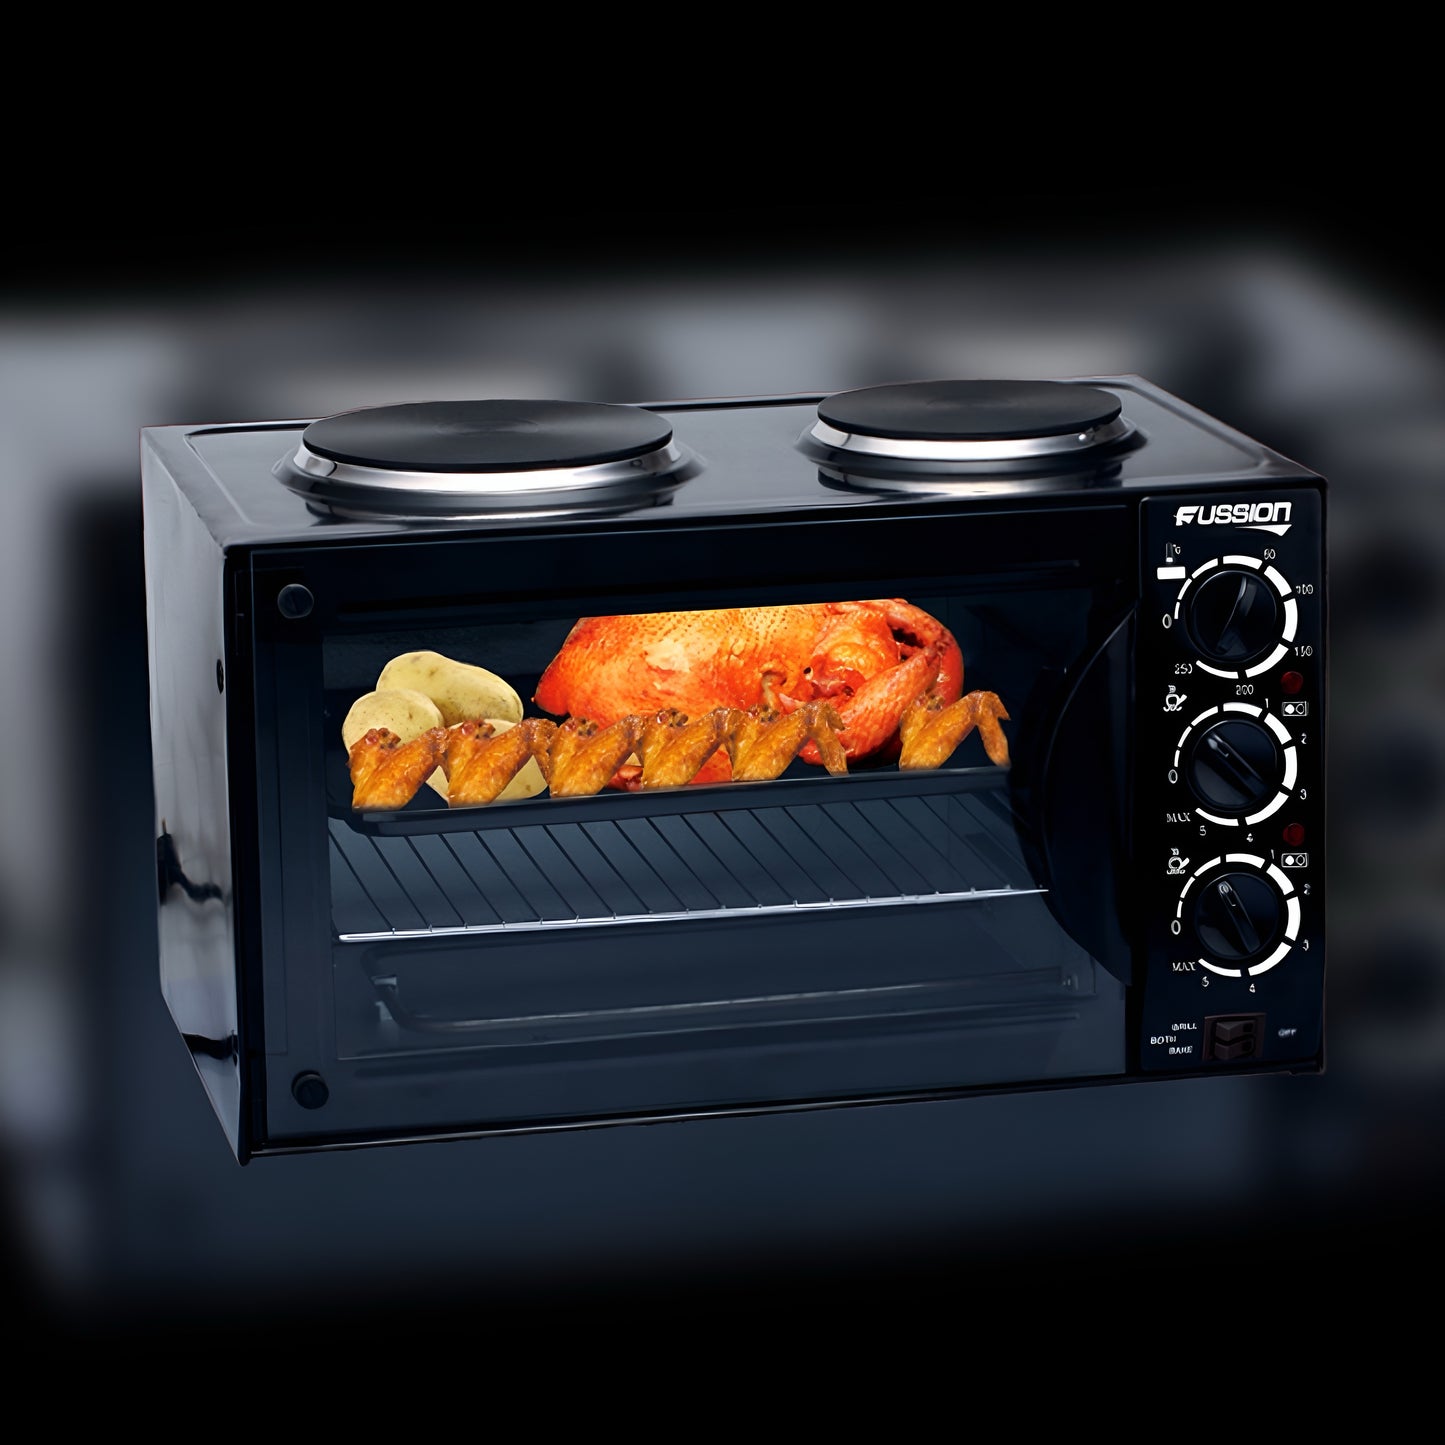 Fusion solid 2 plate oven stove